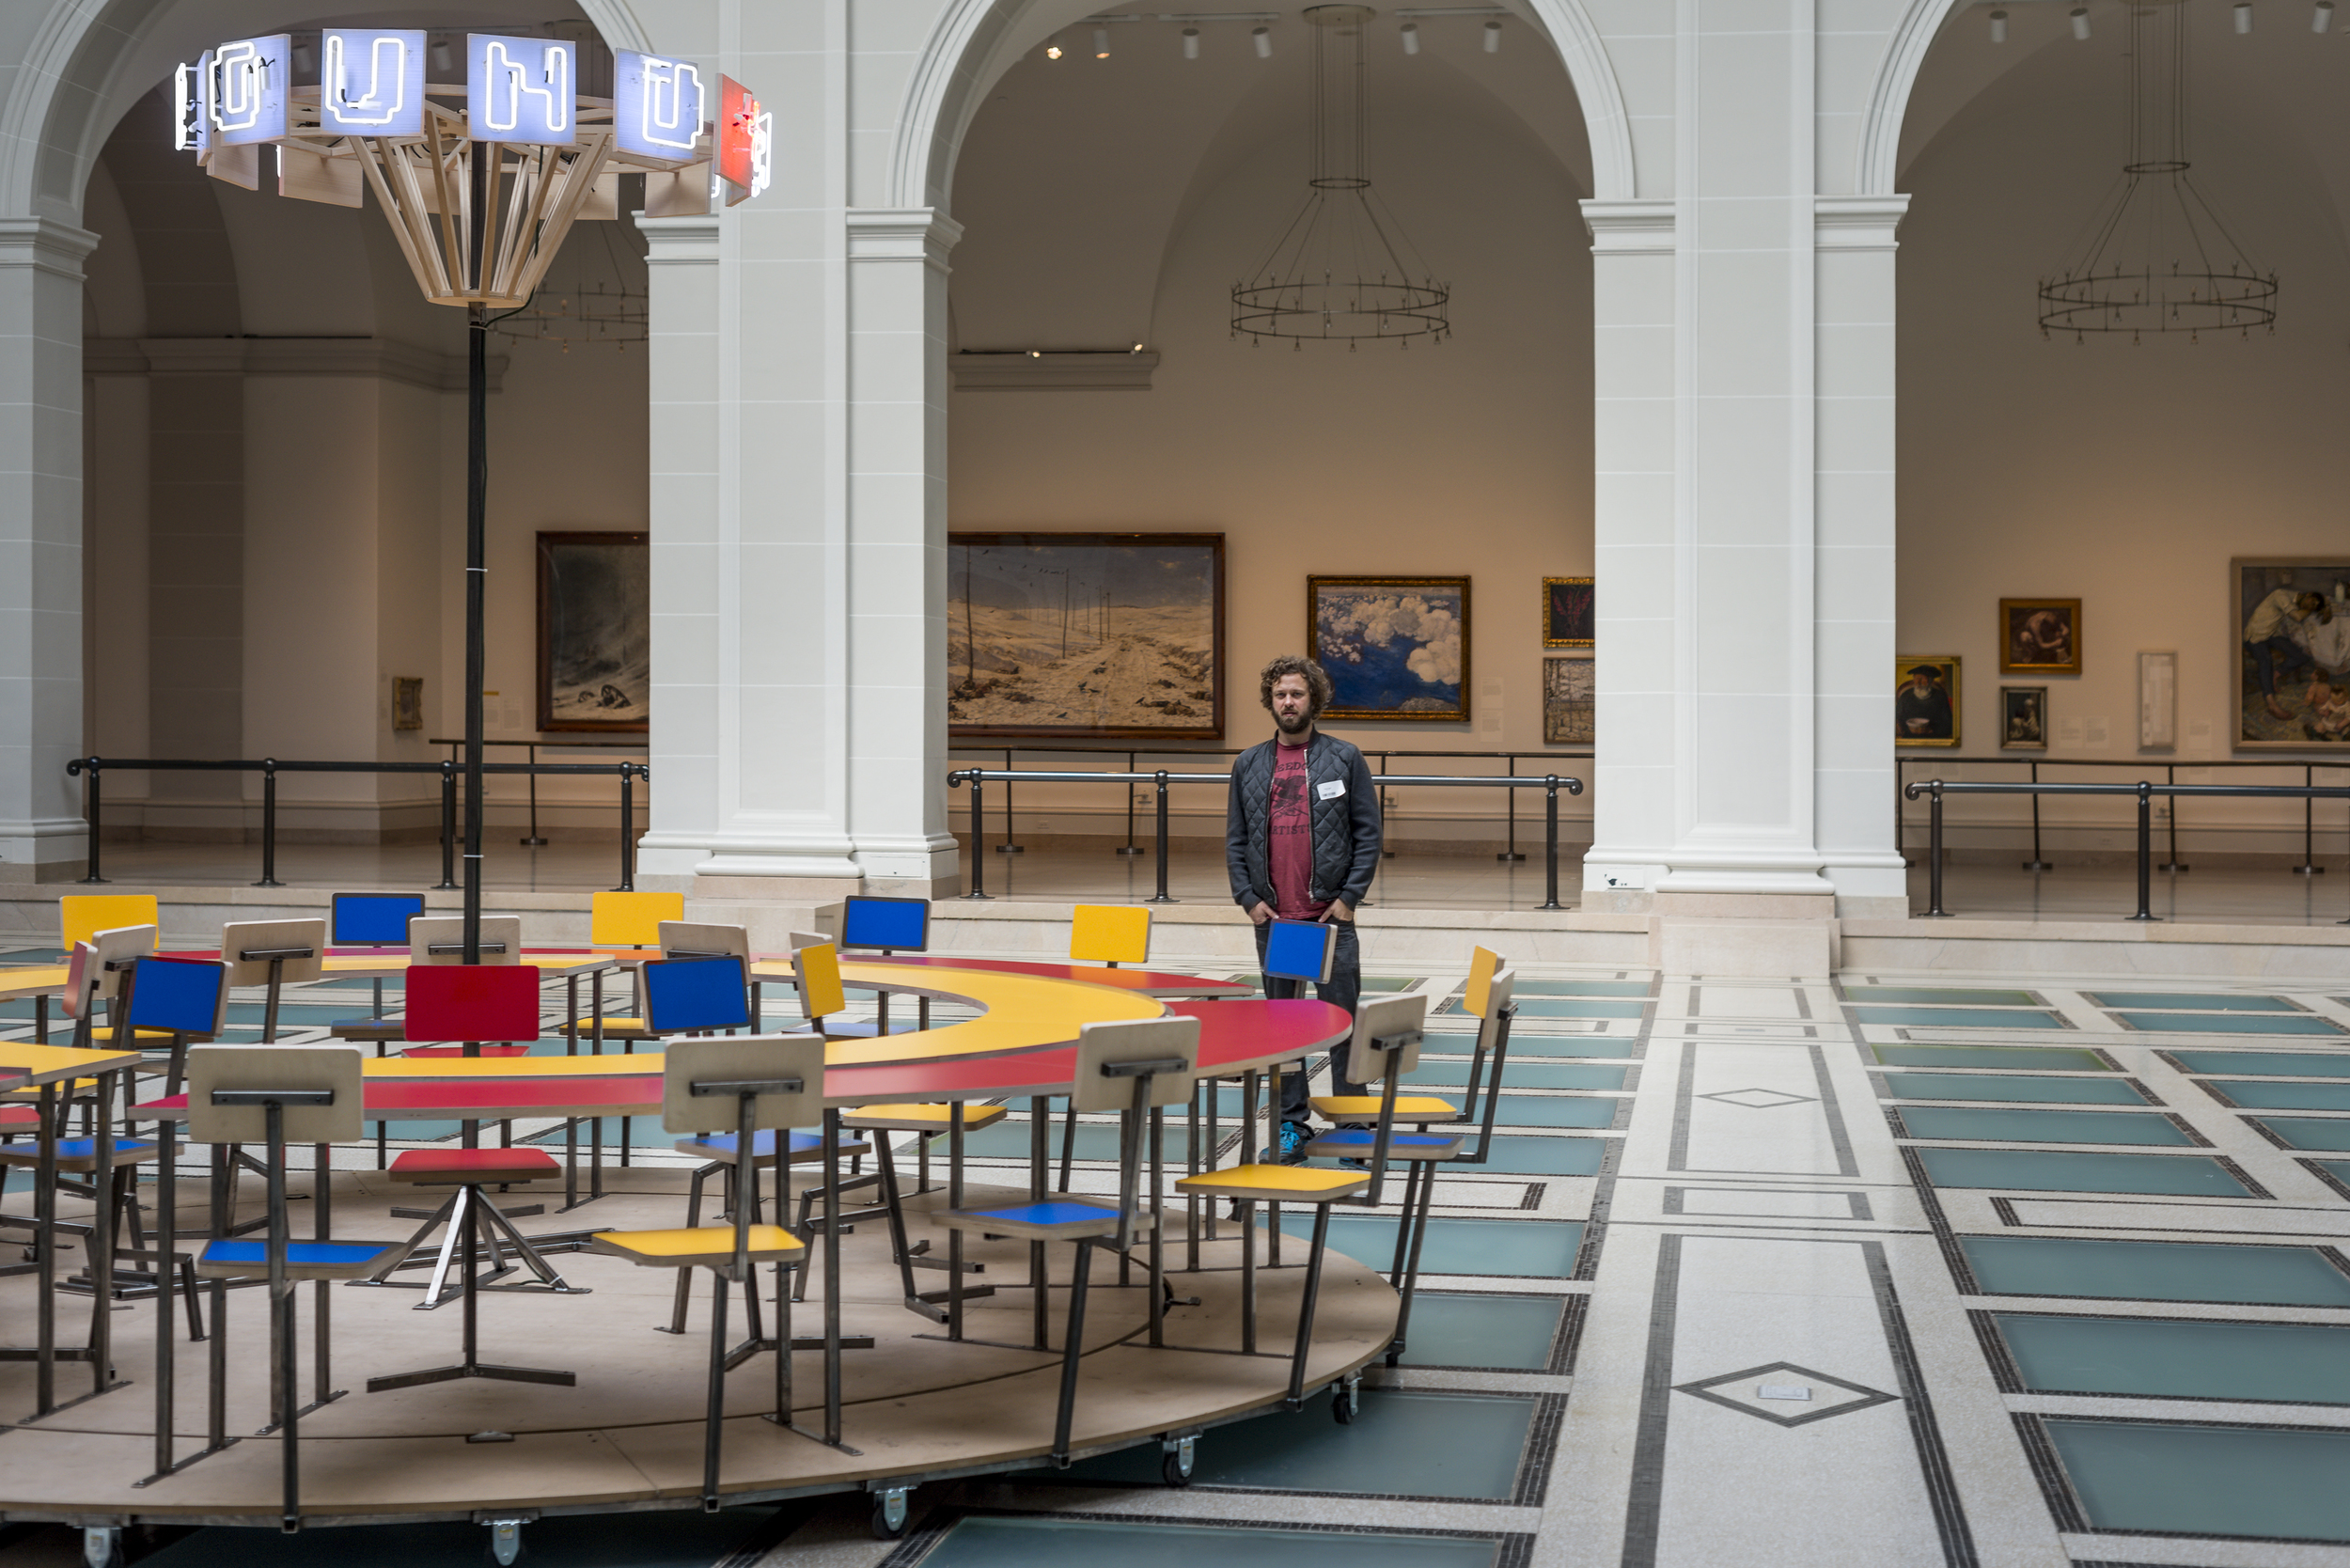  Oliver Clegg pictured with  Until the Cows Come Home  (2014), as installed at the Brooklyn Museum in 2014. Steel, neon, laminated mdf, pine; 60 x 168 in. (table), 24 x 60 in. (neon centerpiece). ( photo : Giles Ashford) 